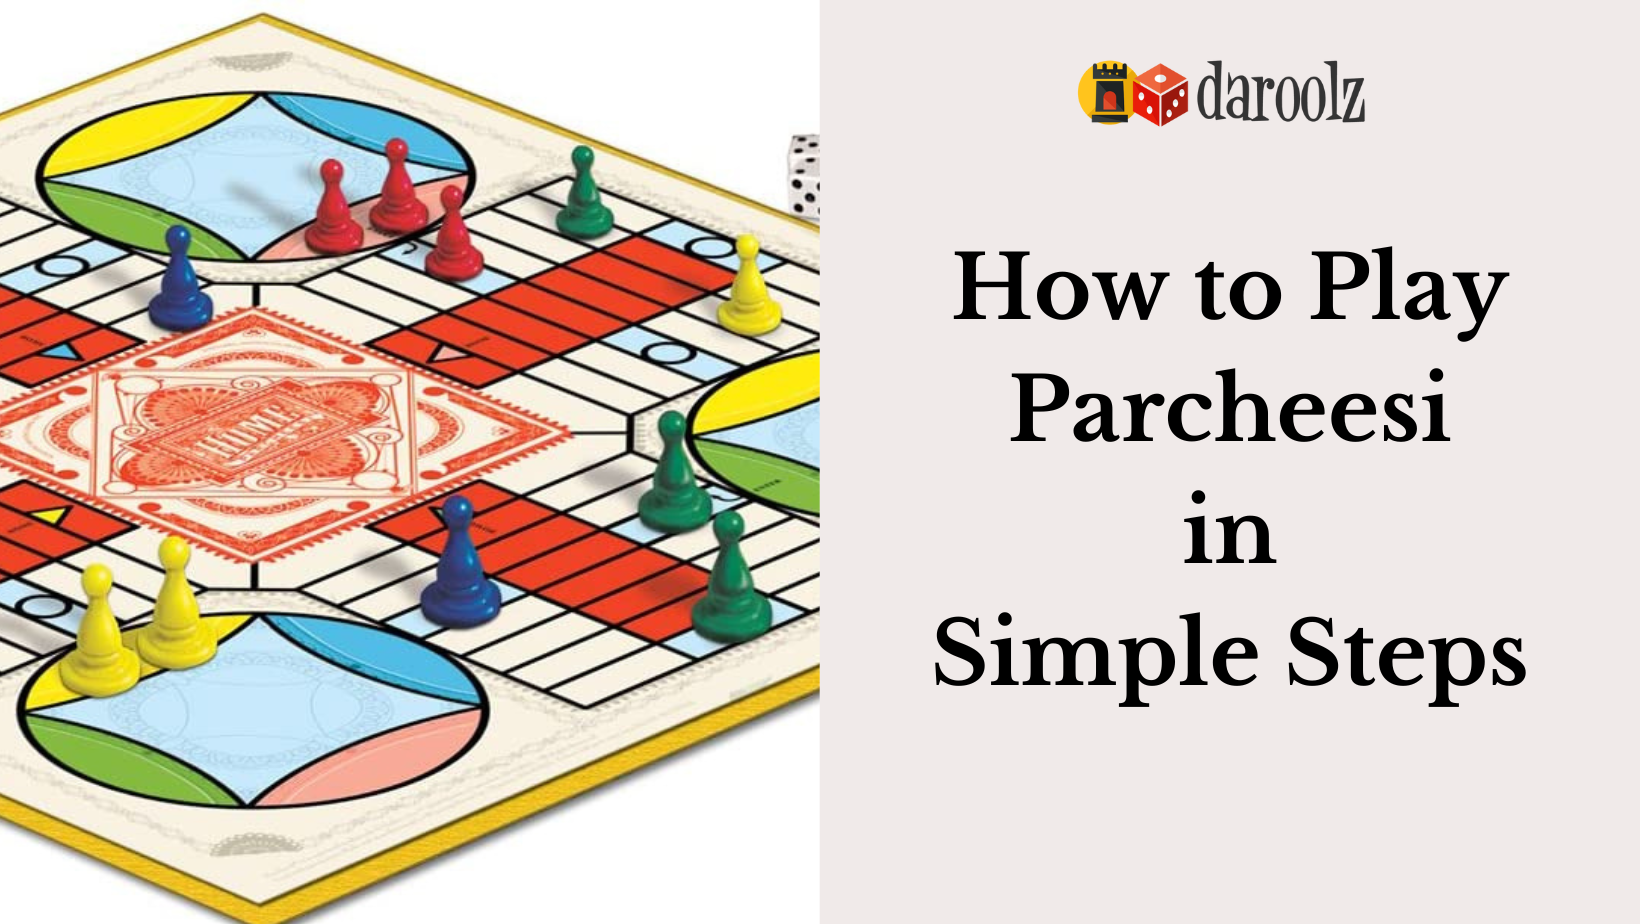 Rules to Parcheesi